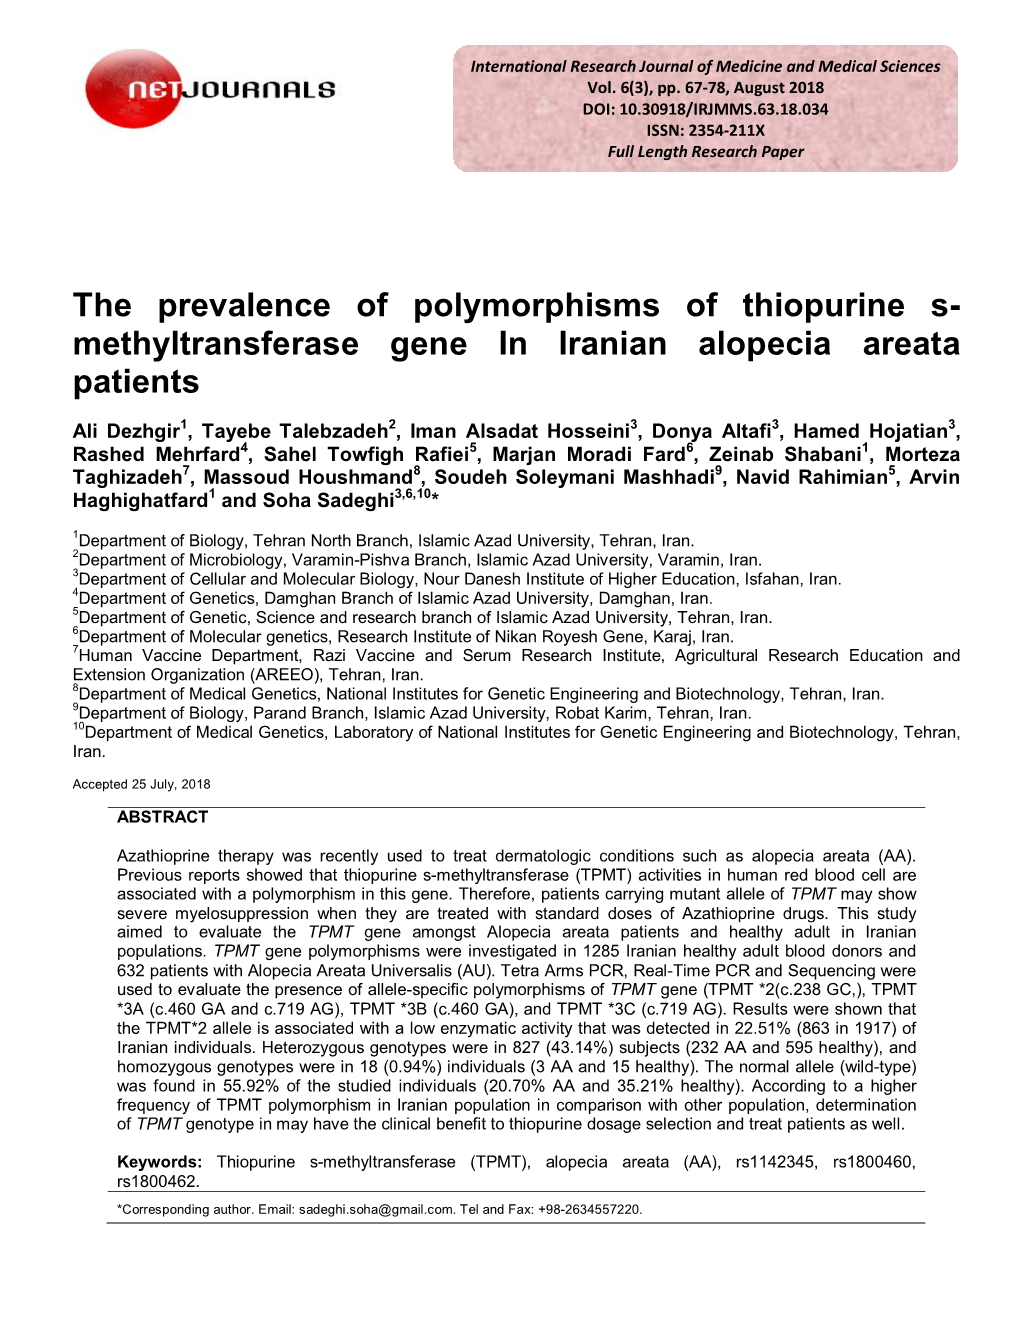 The Prevalence of Polymorphisms of Thiopurine S- Methyltransferase Gene in Iranian Alopecia Areata Patients